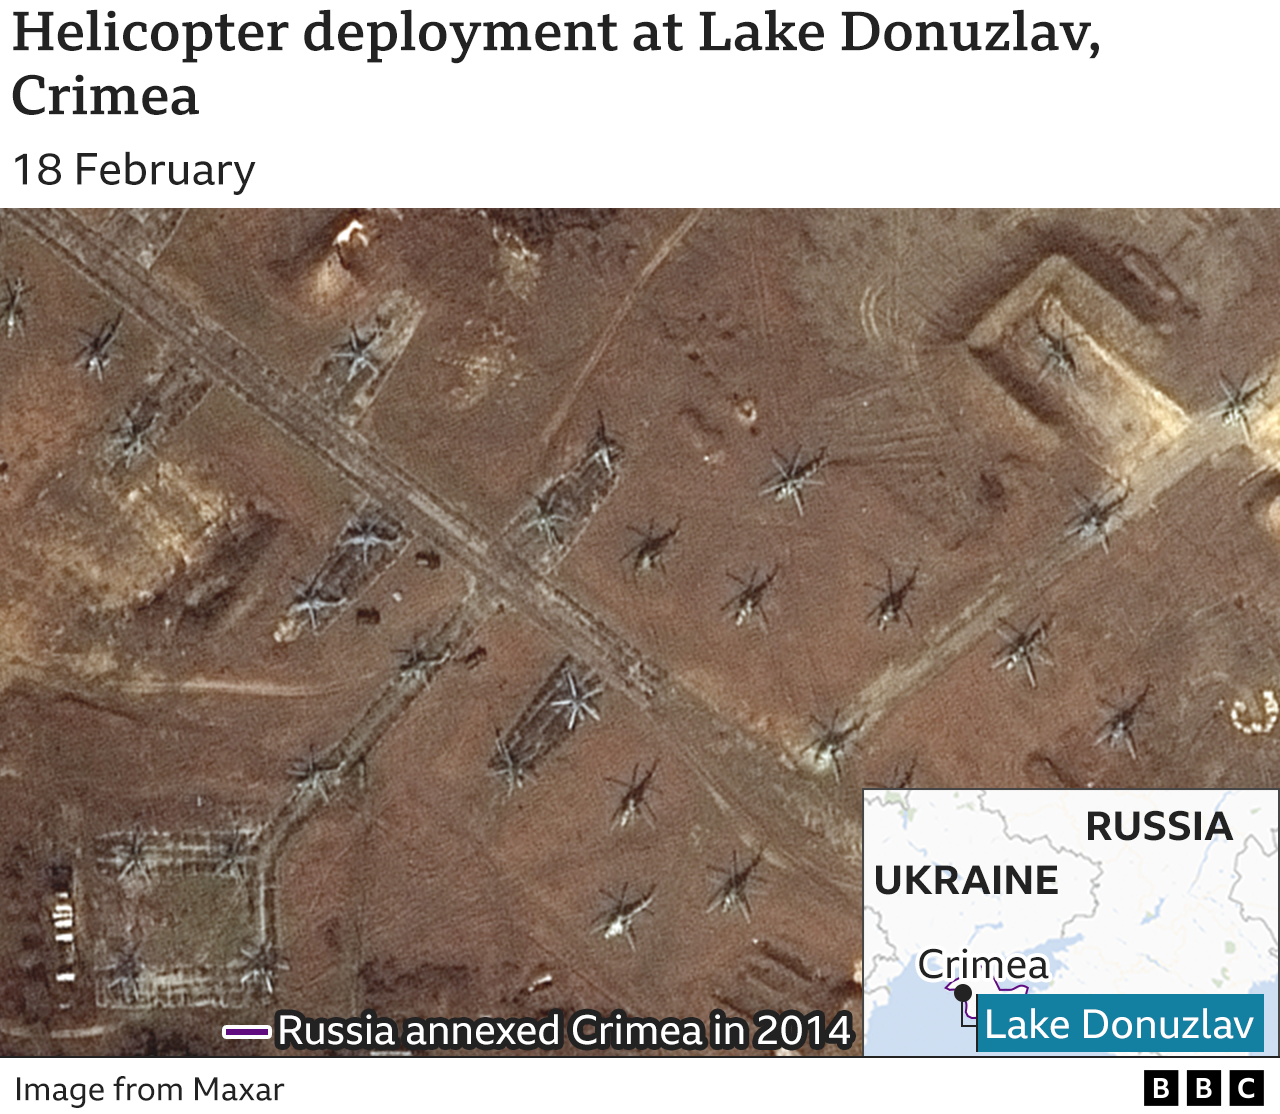 Satellite image showing helicoptetrs in Crimea.